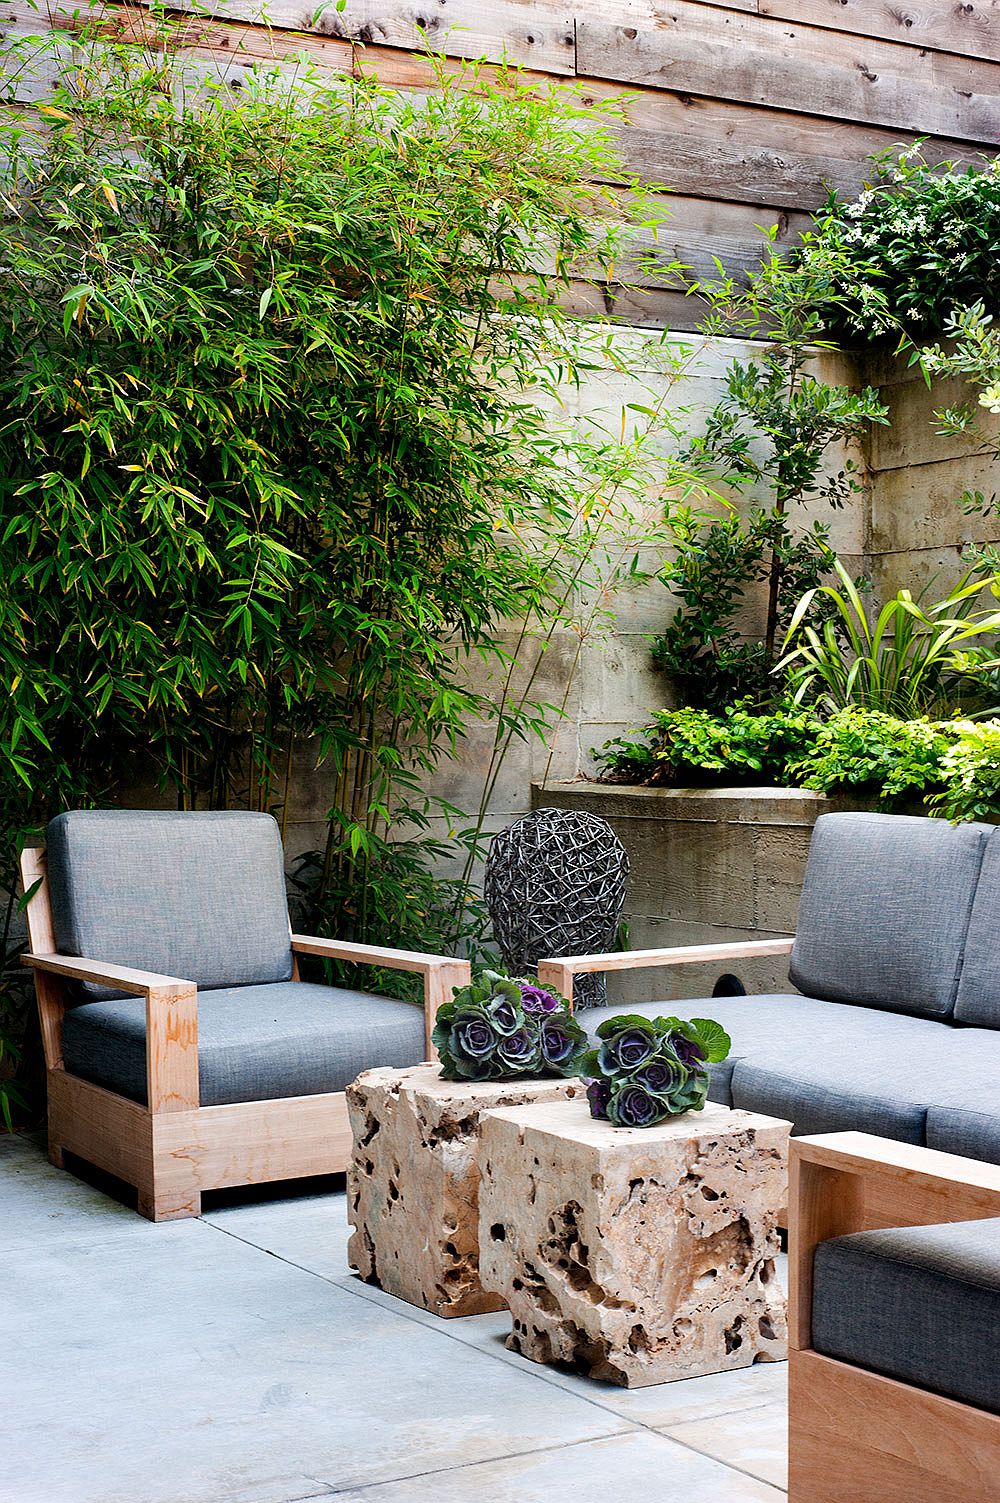 Outdoor living uses Chinese scholar stones as coffee table